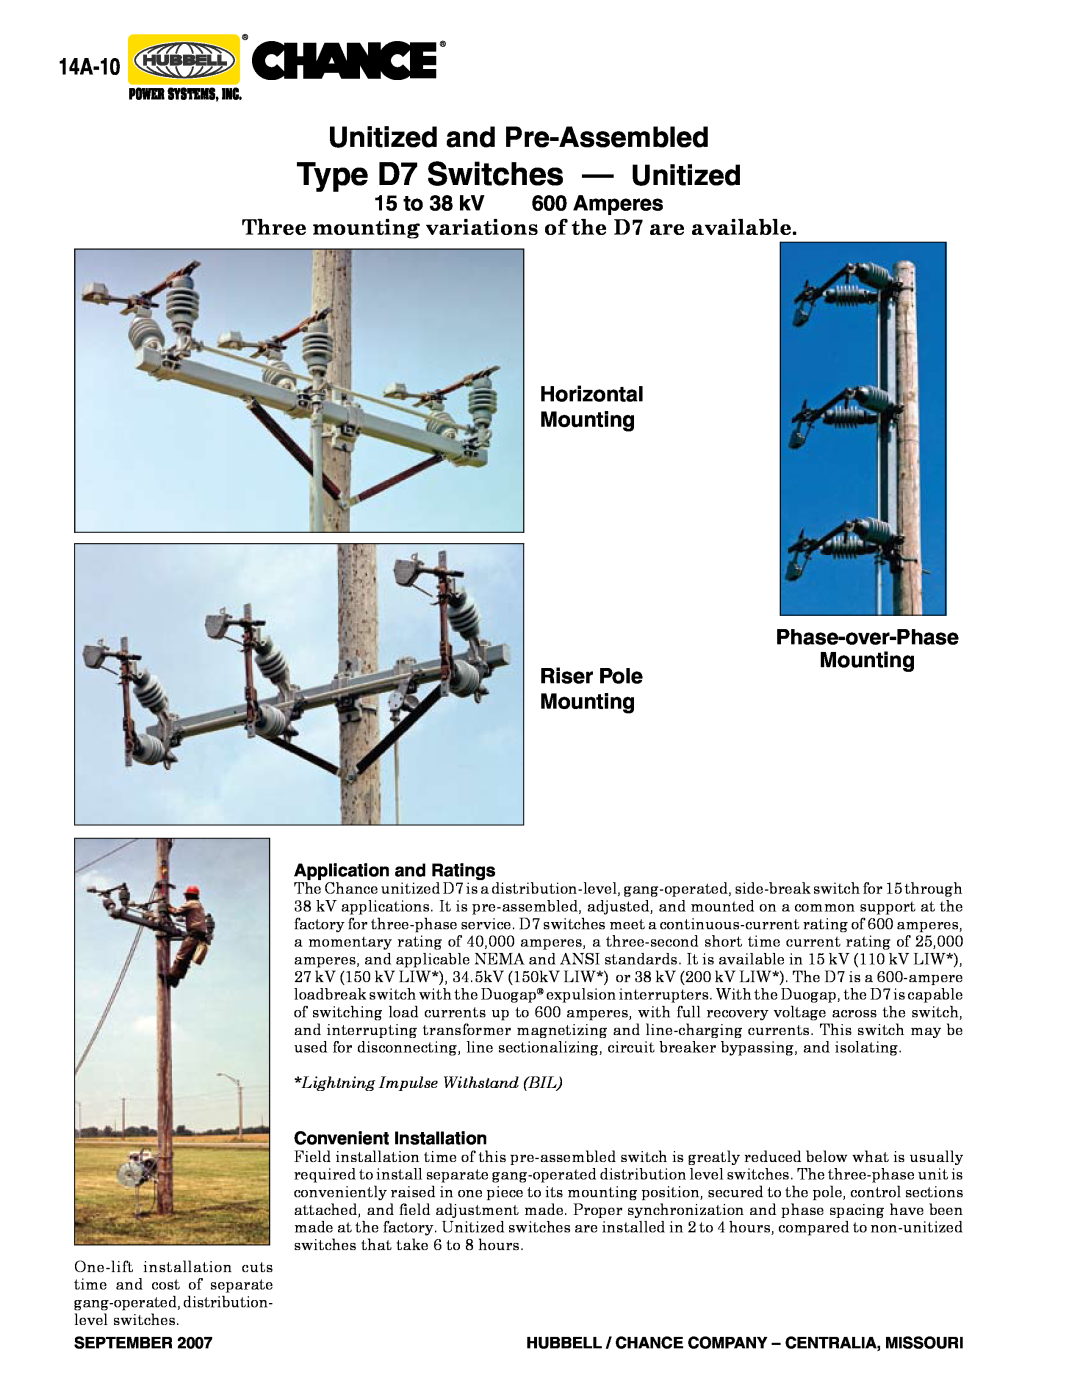 Hubbell Type AR Type D7 Switches - Unitized, Unitized and Pre-Assembled, 14A-10, 15 to 38 kV, Amperes, Riser Pole Mounting 